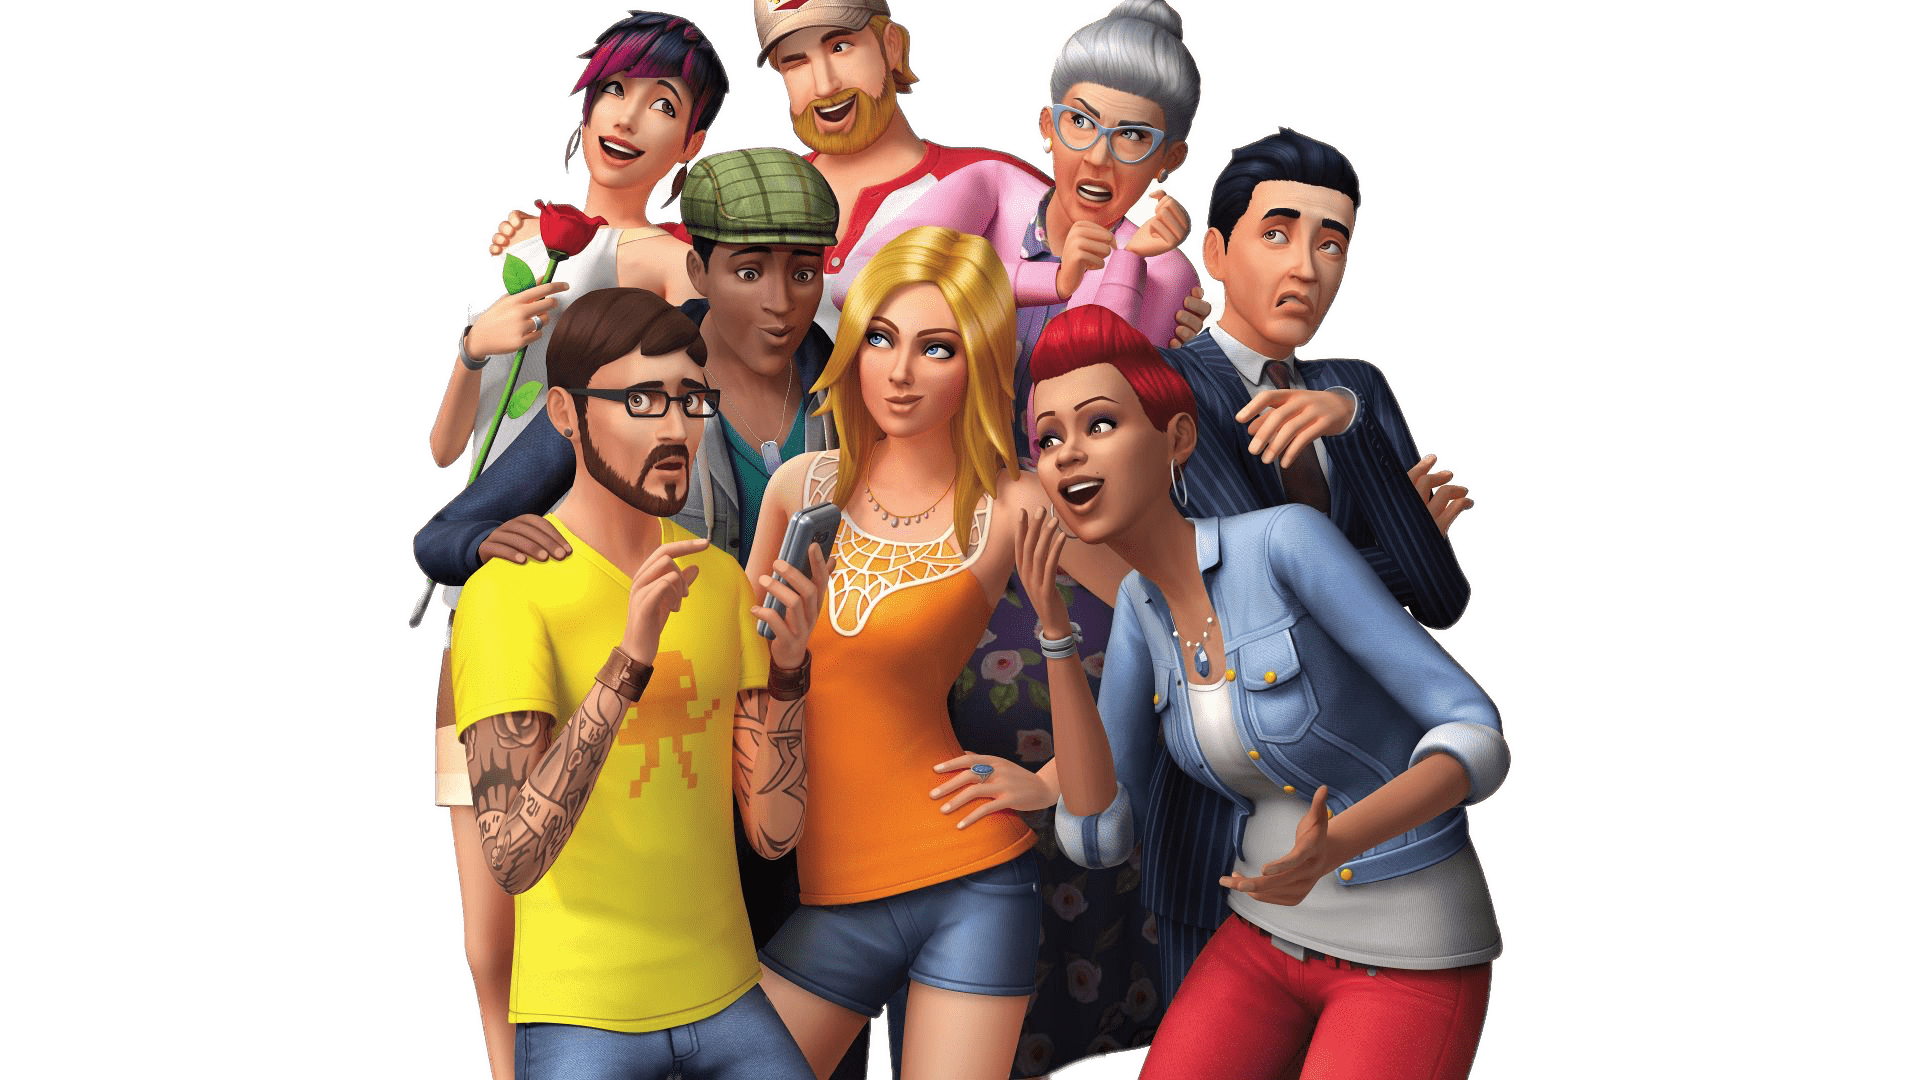 The Sims PNG HD Images